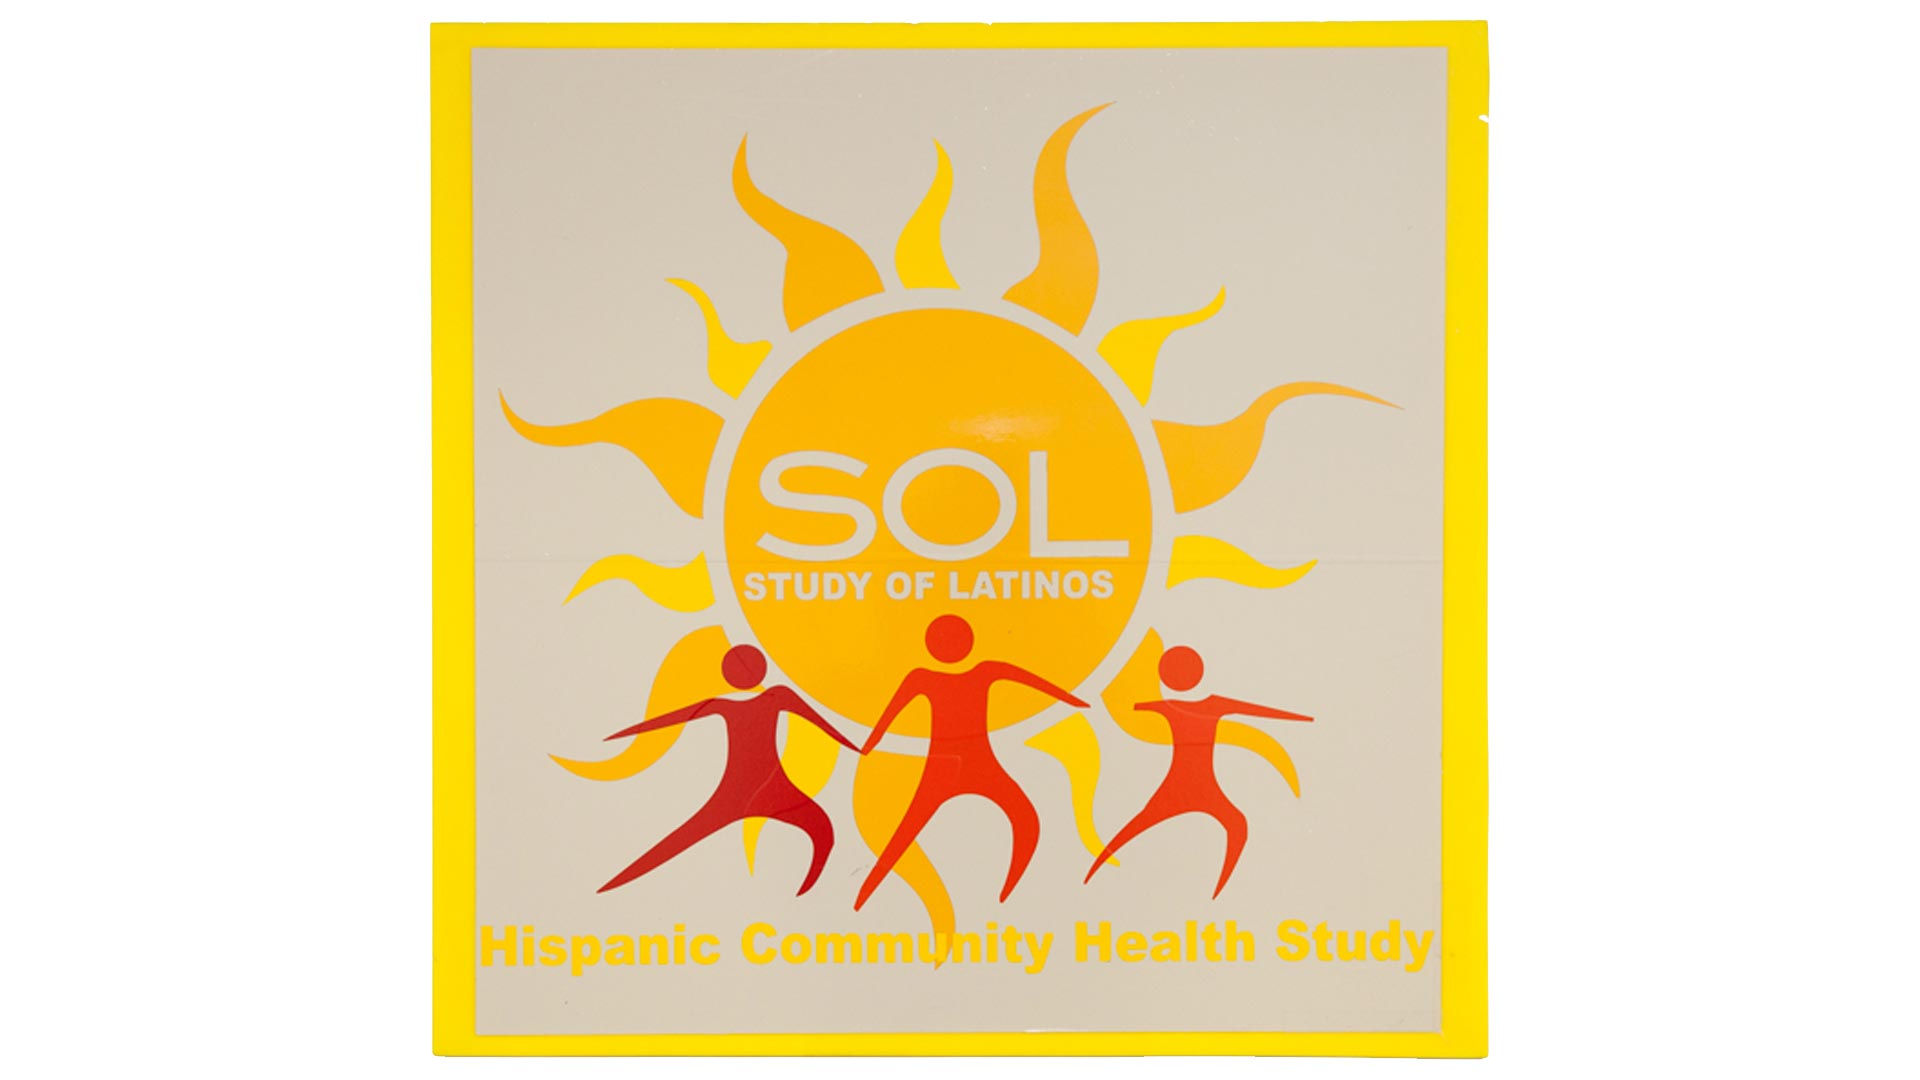 Landmark Research Aims to Learn about Hispanic/Latino Health